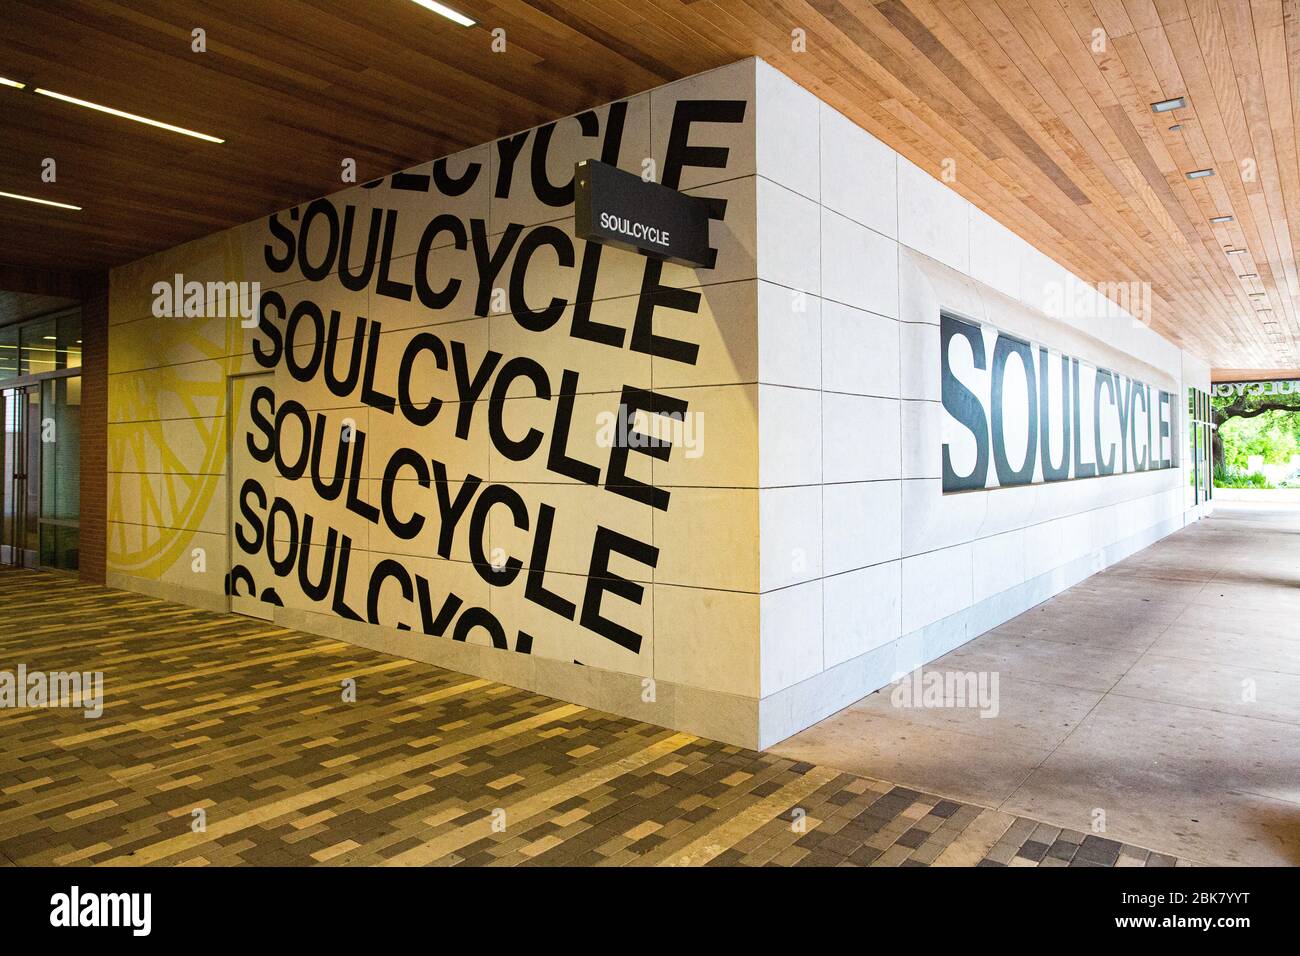 Soulcycle During the 2020 Pandemic Stock Photo